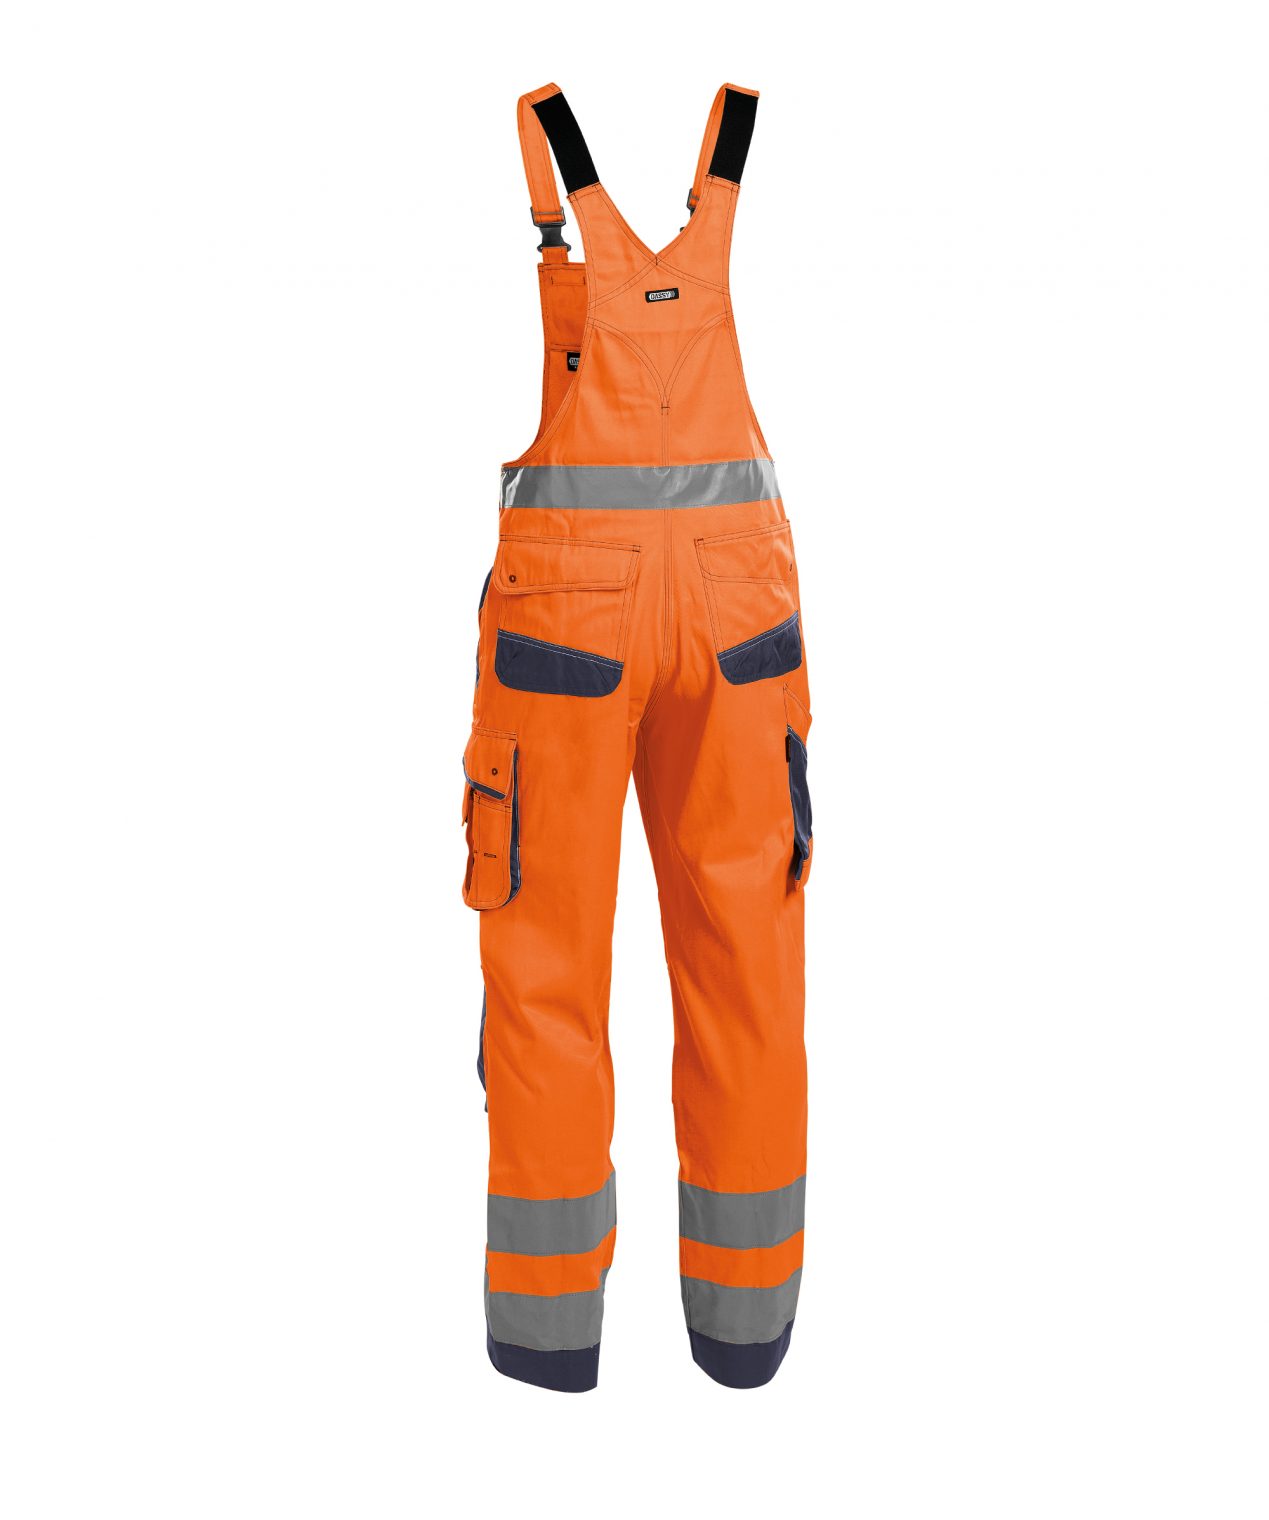 malmedy high visibility brace overall with knee pockets fluo orange navy back